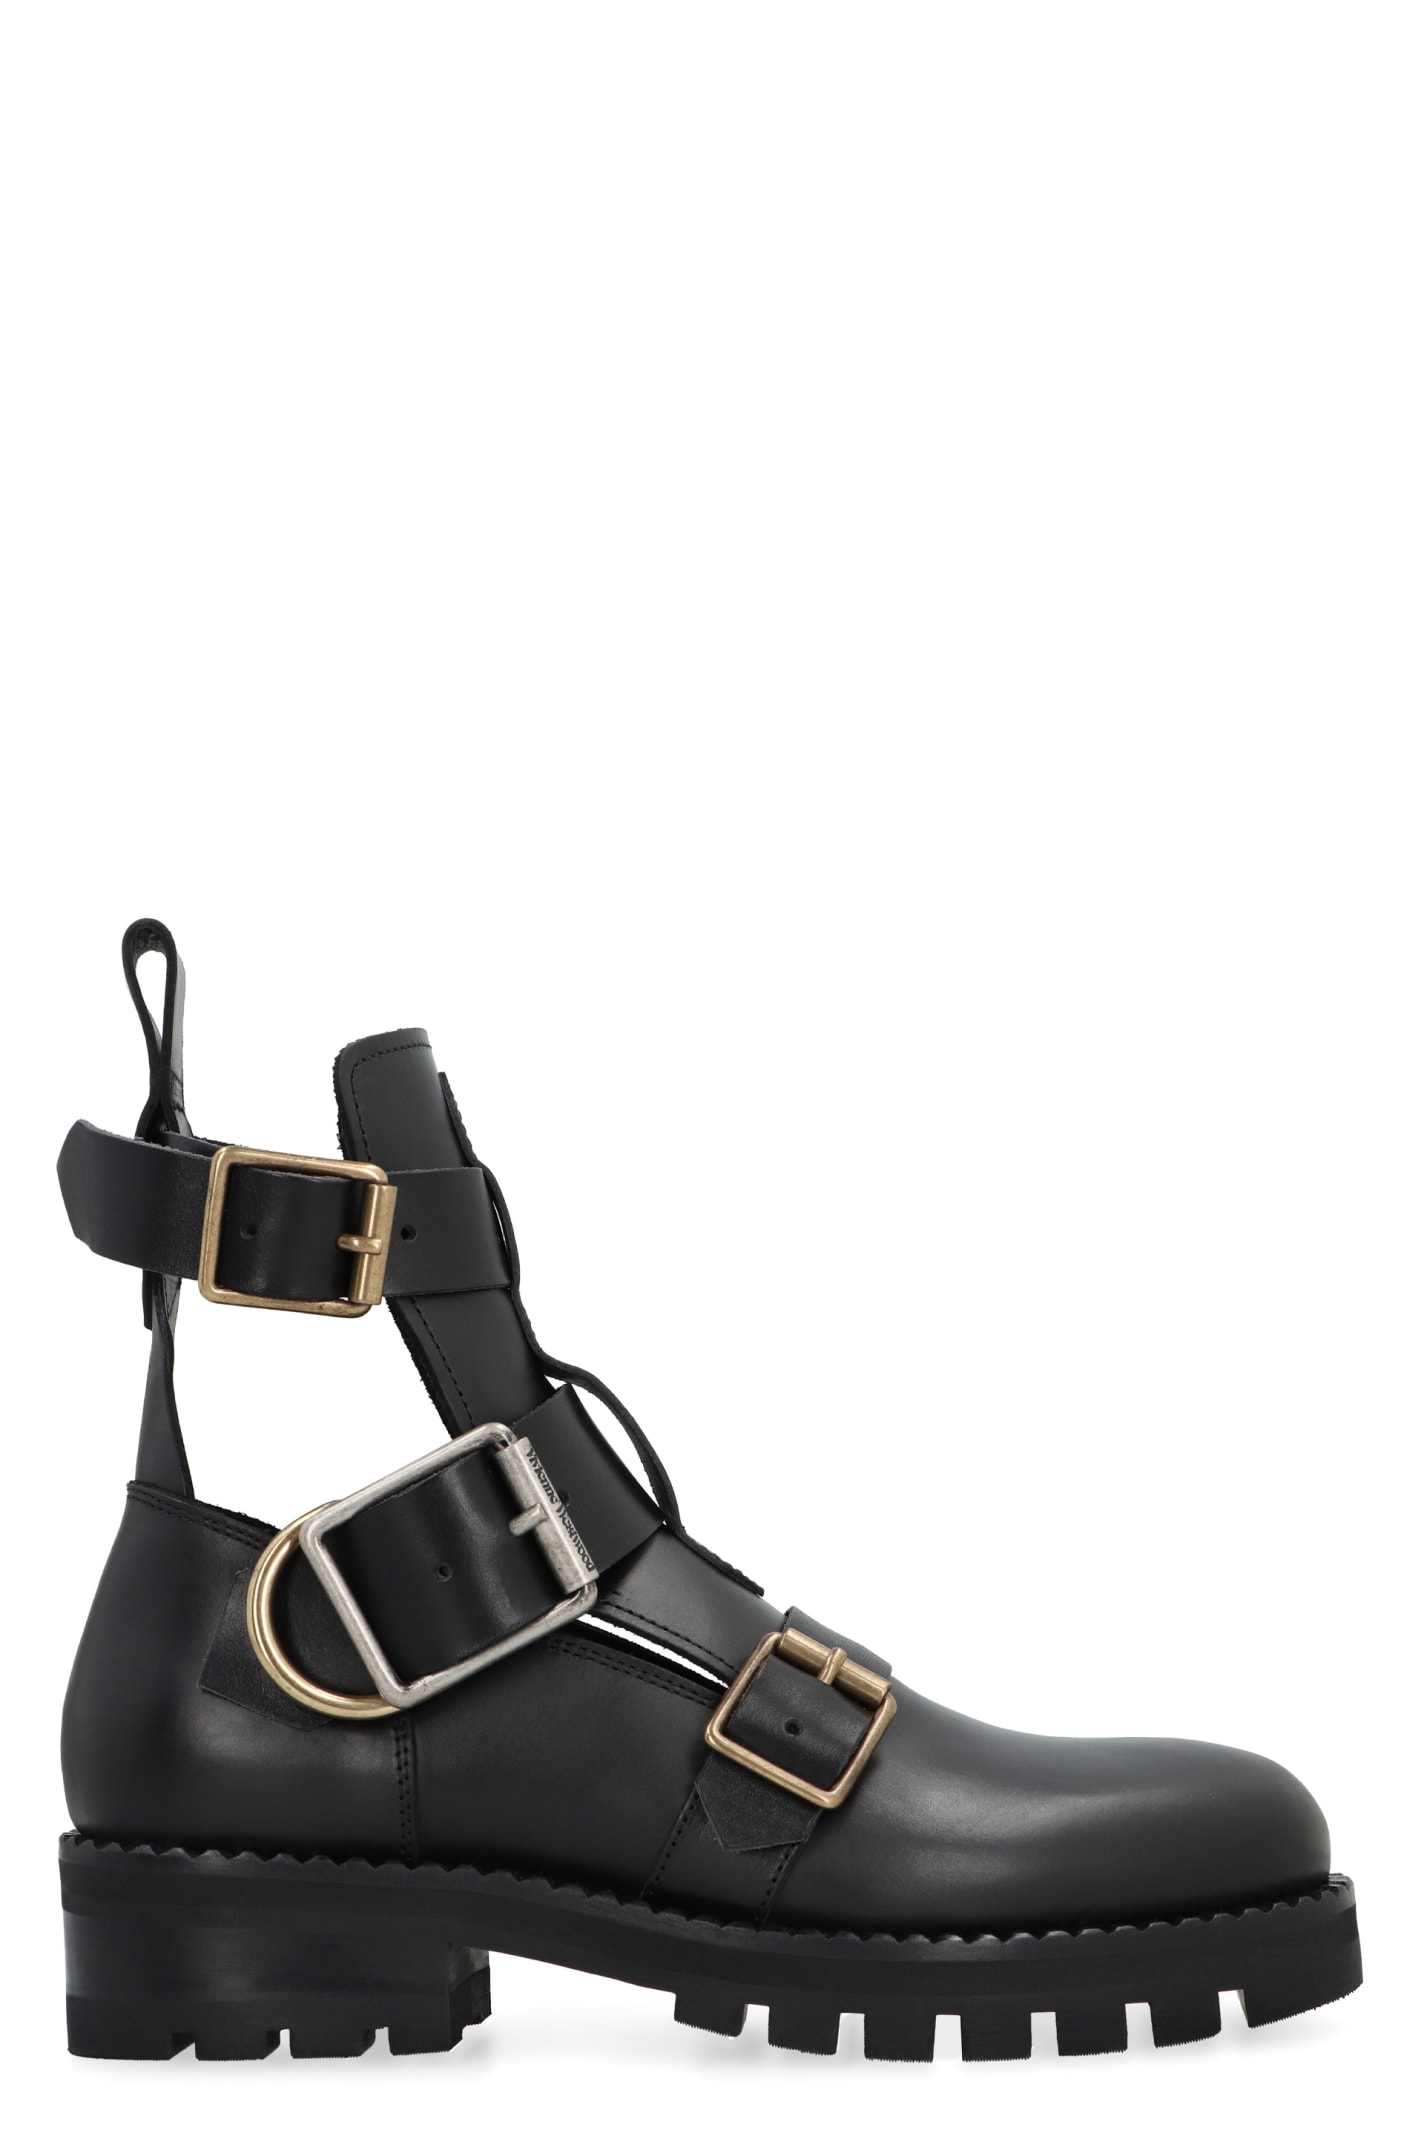 Shop Vivienne Westwood Rome Leather Ankle Boots In Black